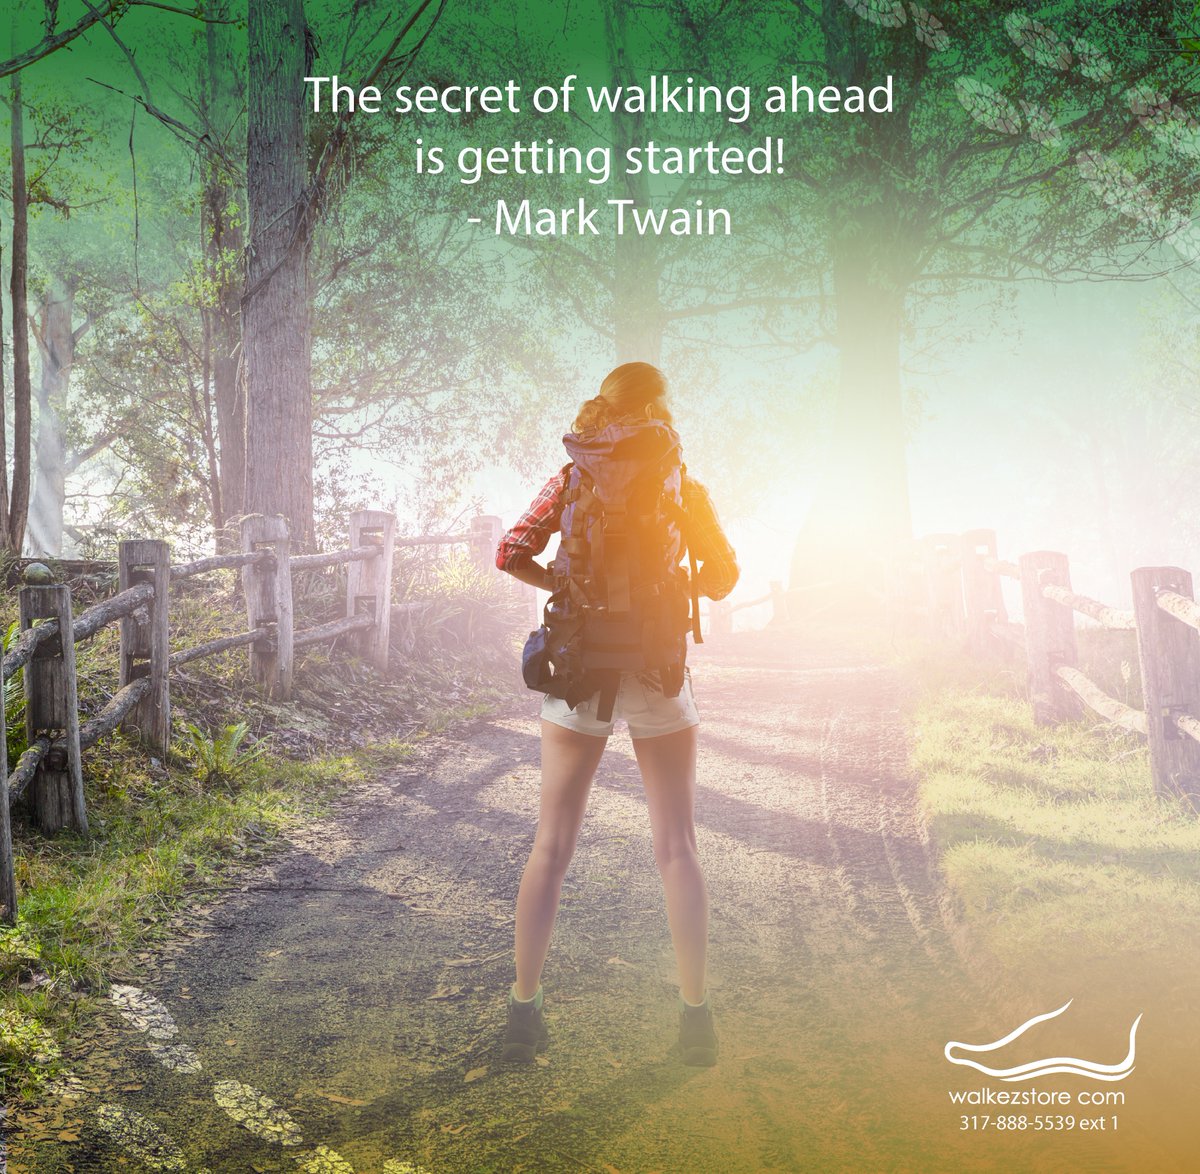 At WalkEZstore we know you can get ahead with proper custom orthotics and footwear and we’ll get you started!
#walking #walk #gettingstarted #getahead #success #successmindset #successquotes #wednesdaywisdom #wednesday #wednesdaymotivation #journeytosuccess #footwear #foothealth